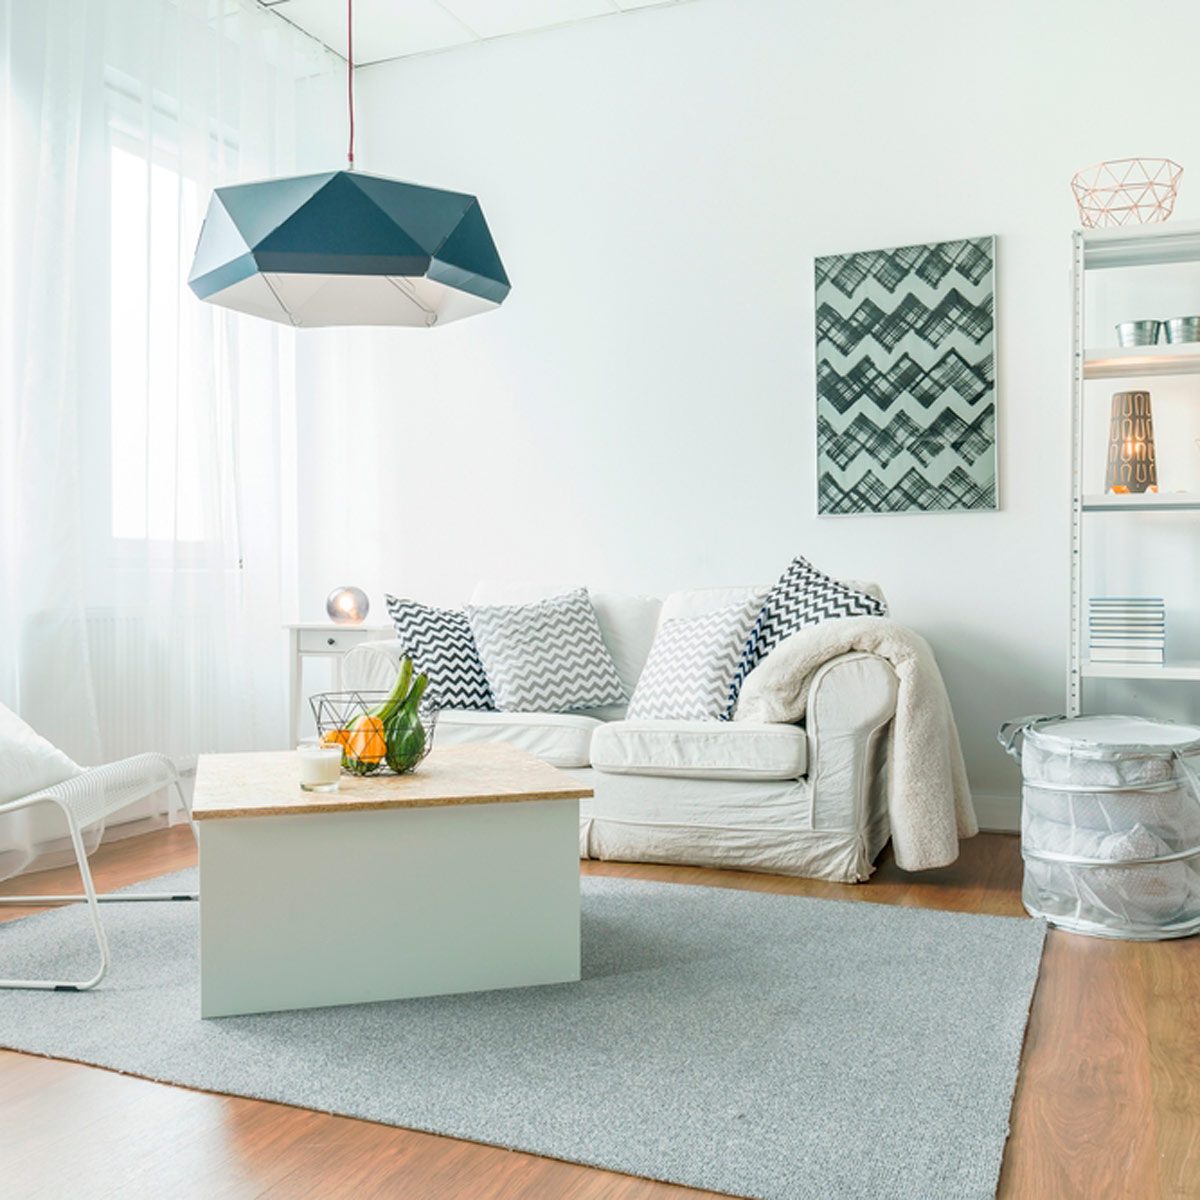 10 Ways You're Arranging Your Furniture All Wrong | Family Handyman ...